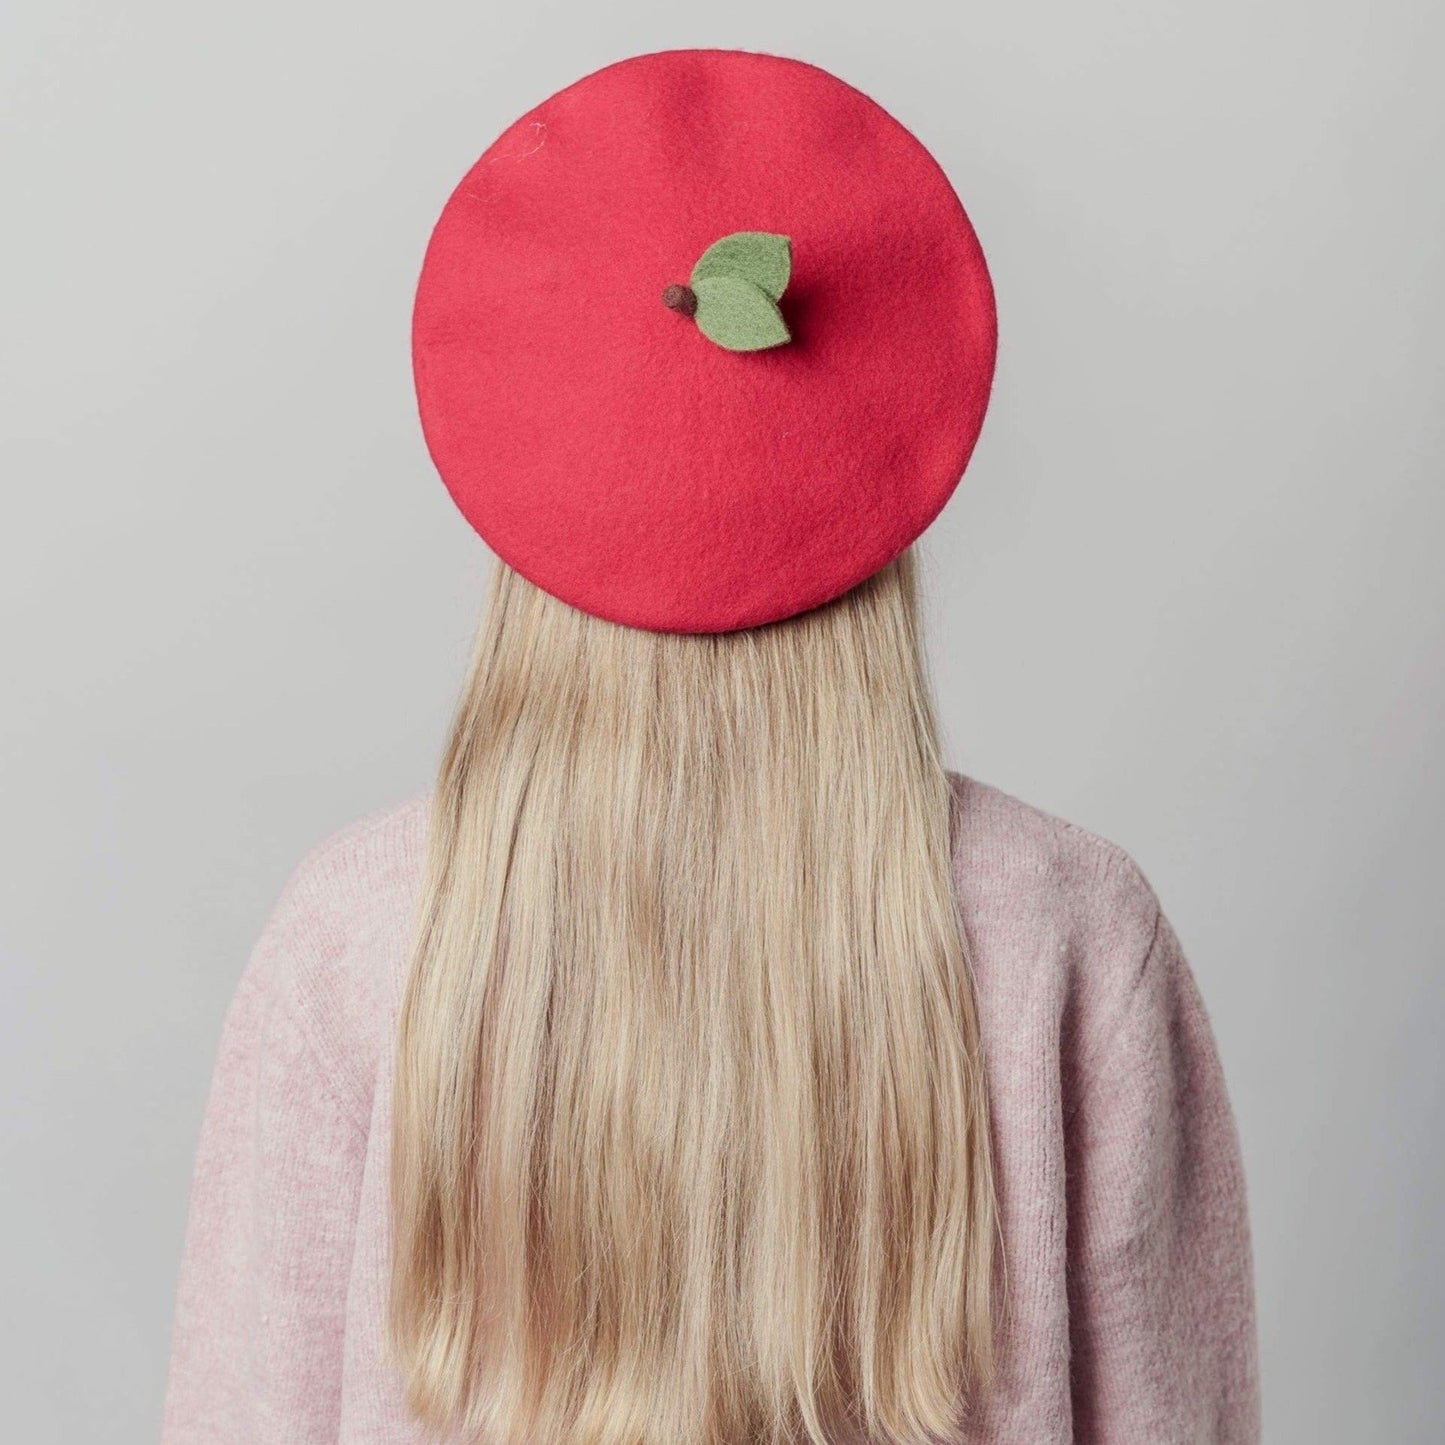 Apple Beret for Women and Kids.